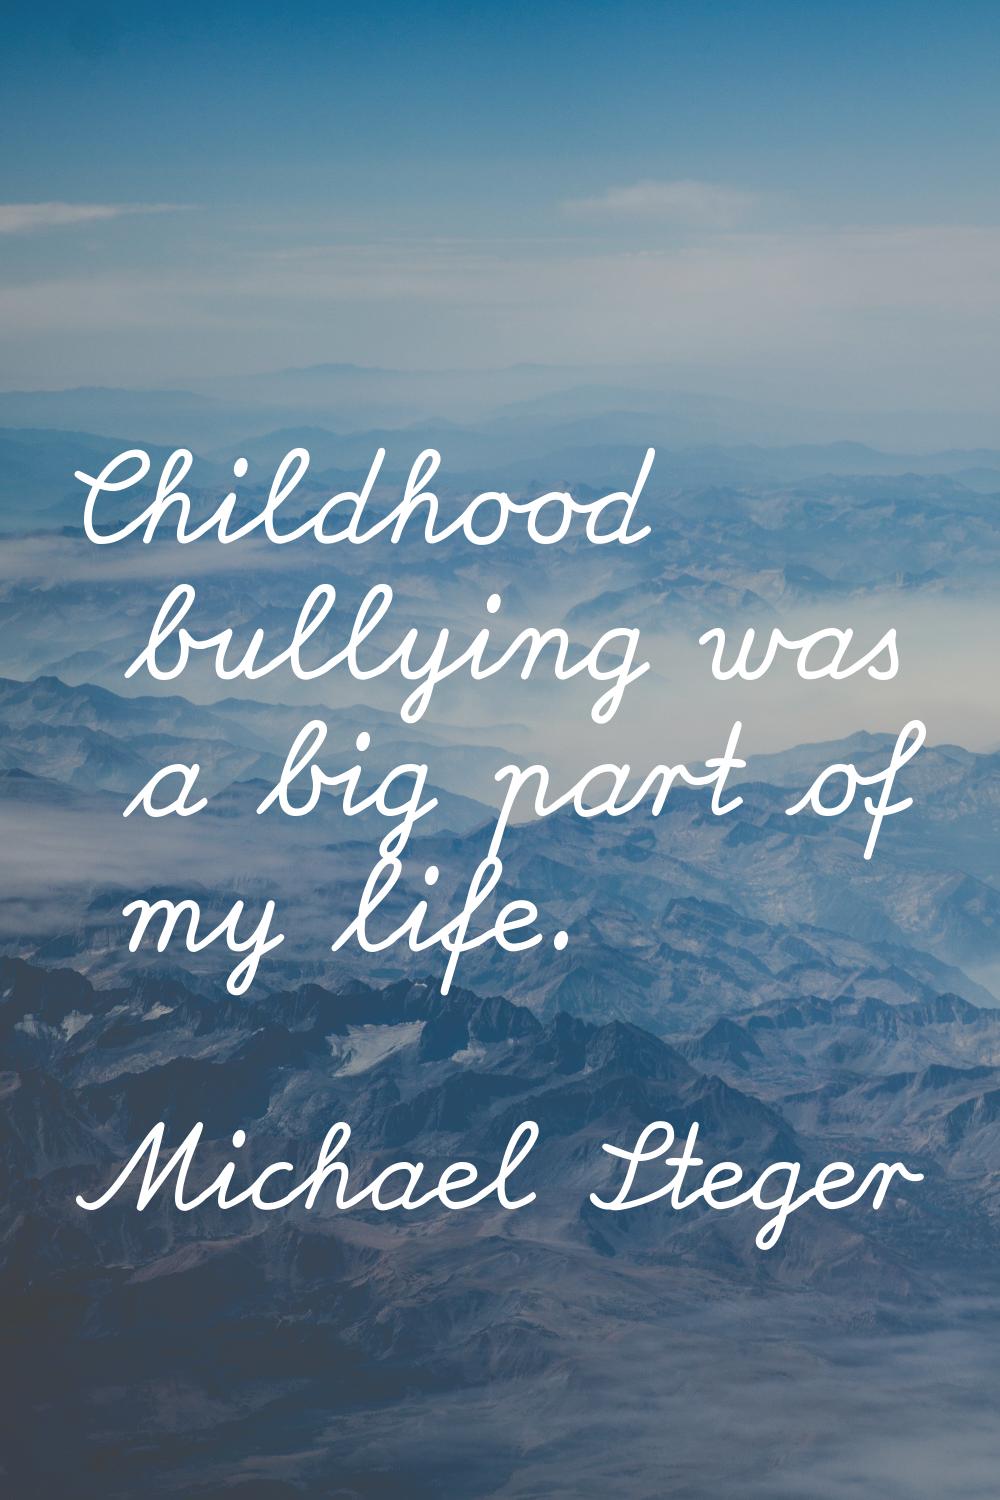 Childhood bullying was a big part of my life.